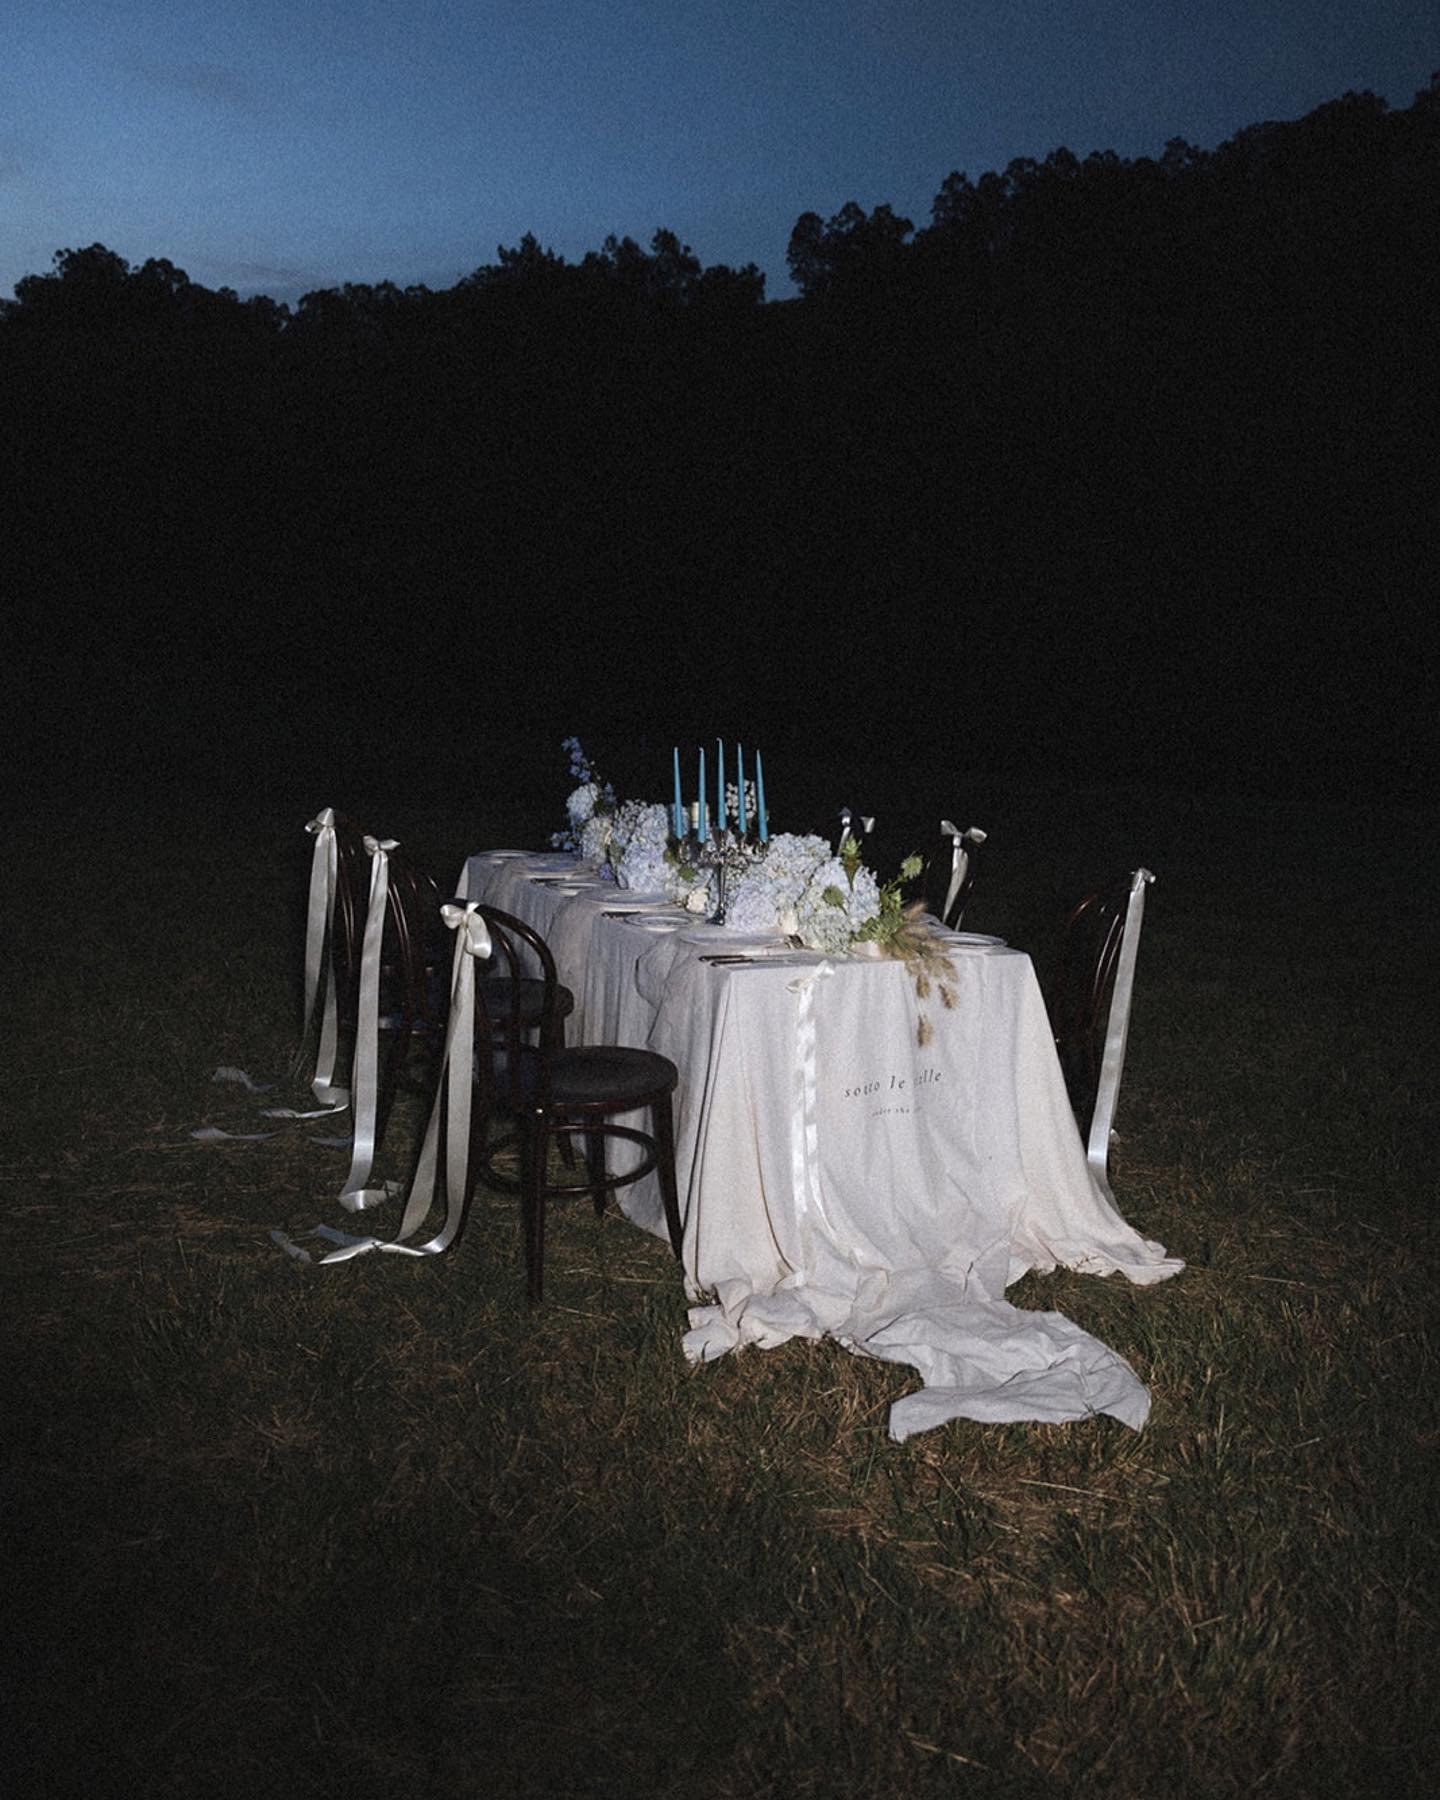 Bleu | sweet cakes hidden in table blooms, bows on bentwood chairs, tulle and menu musings on hand made paper, farewell to the sun and look forward to a night under the stars ✨ 

It was only fitting that for our final scene of this series we shot in 